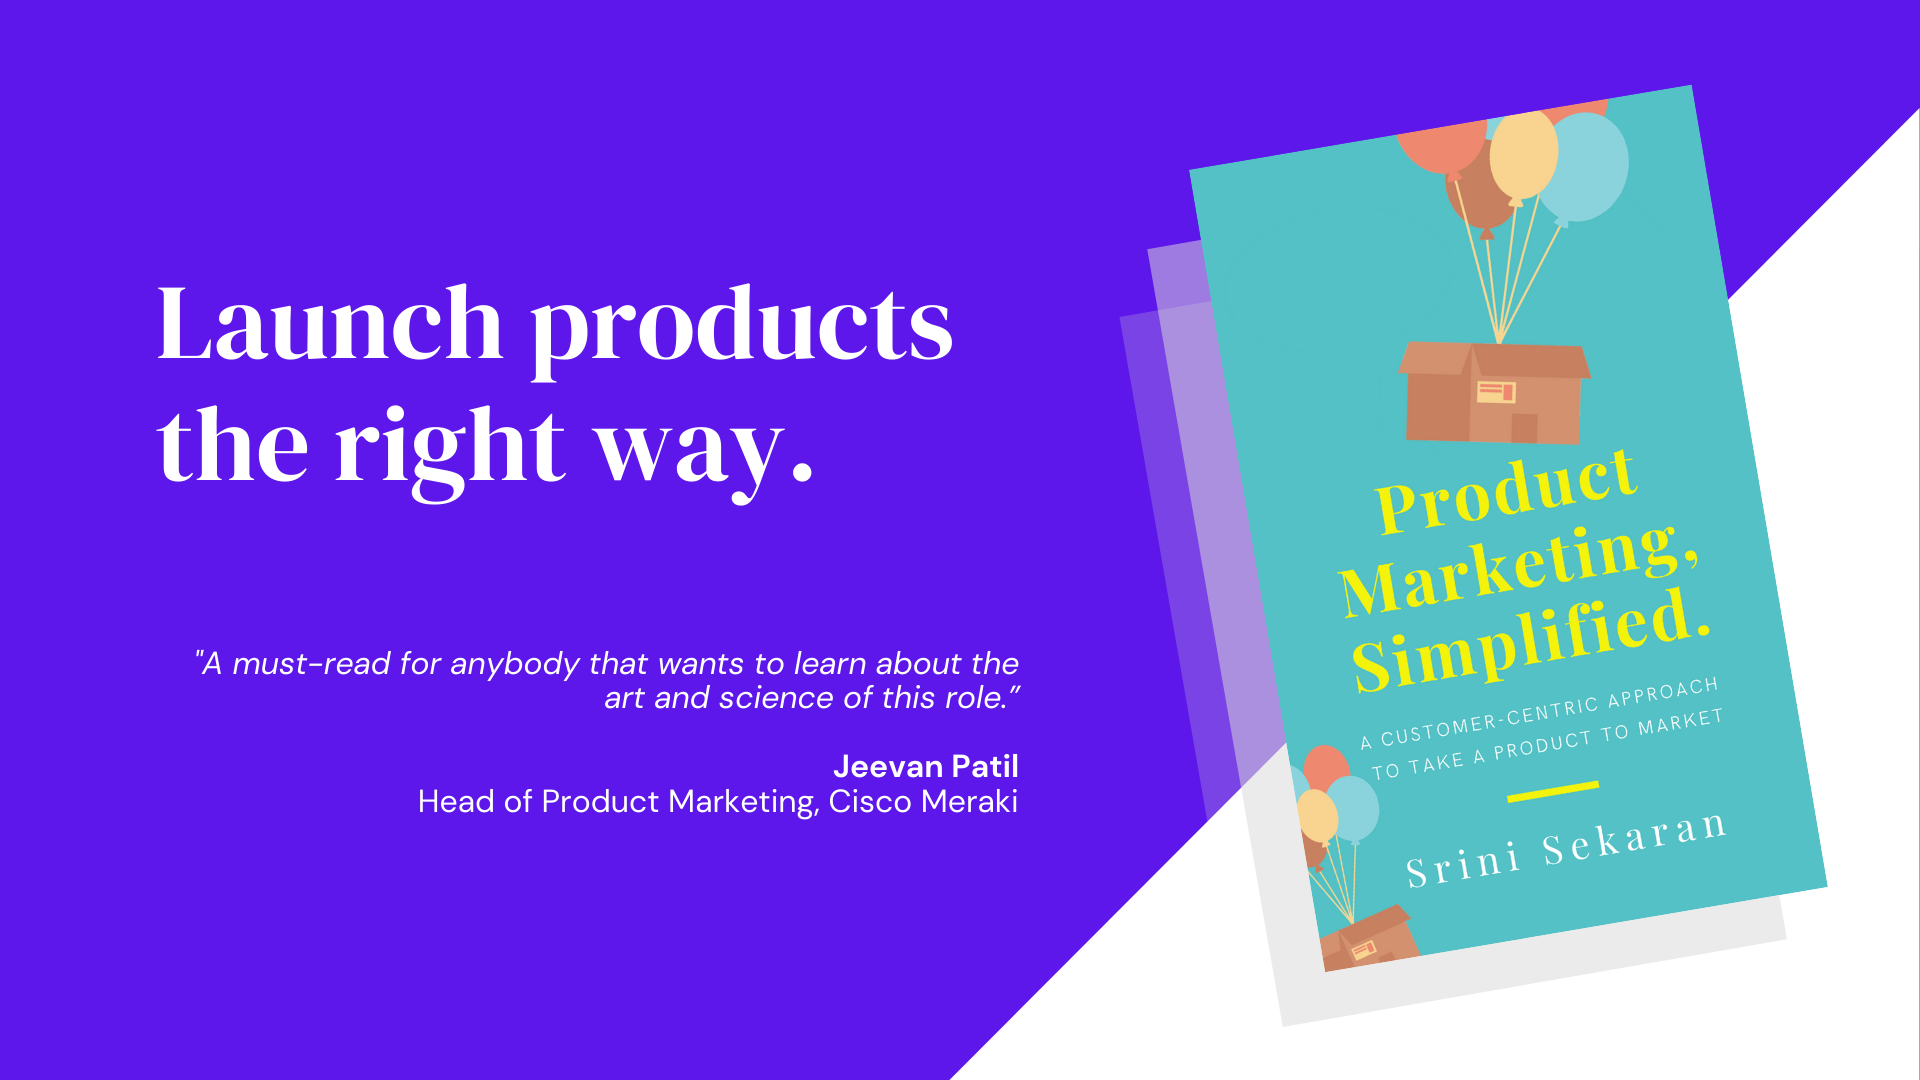 Product Marketing, Simplified: A Customer-Centric Approach to Take a Product to Market – Srini Sekaran